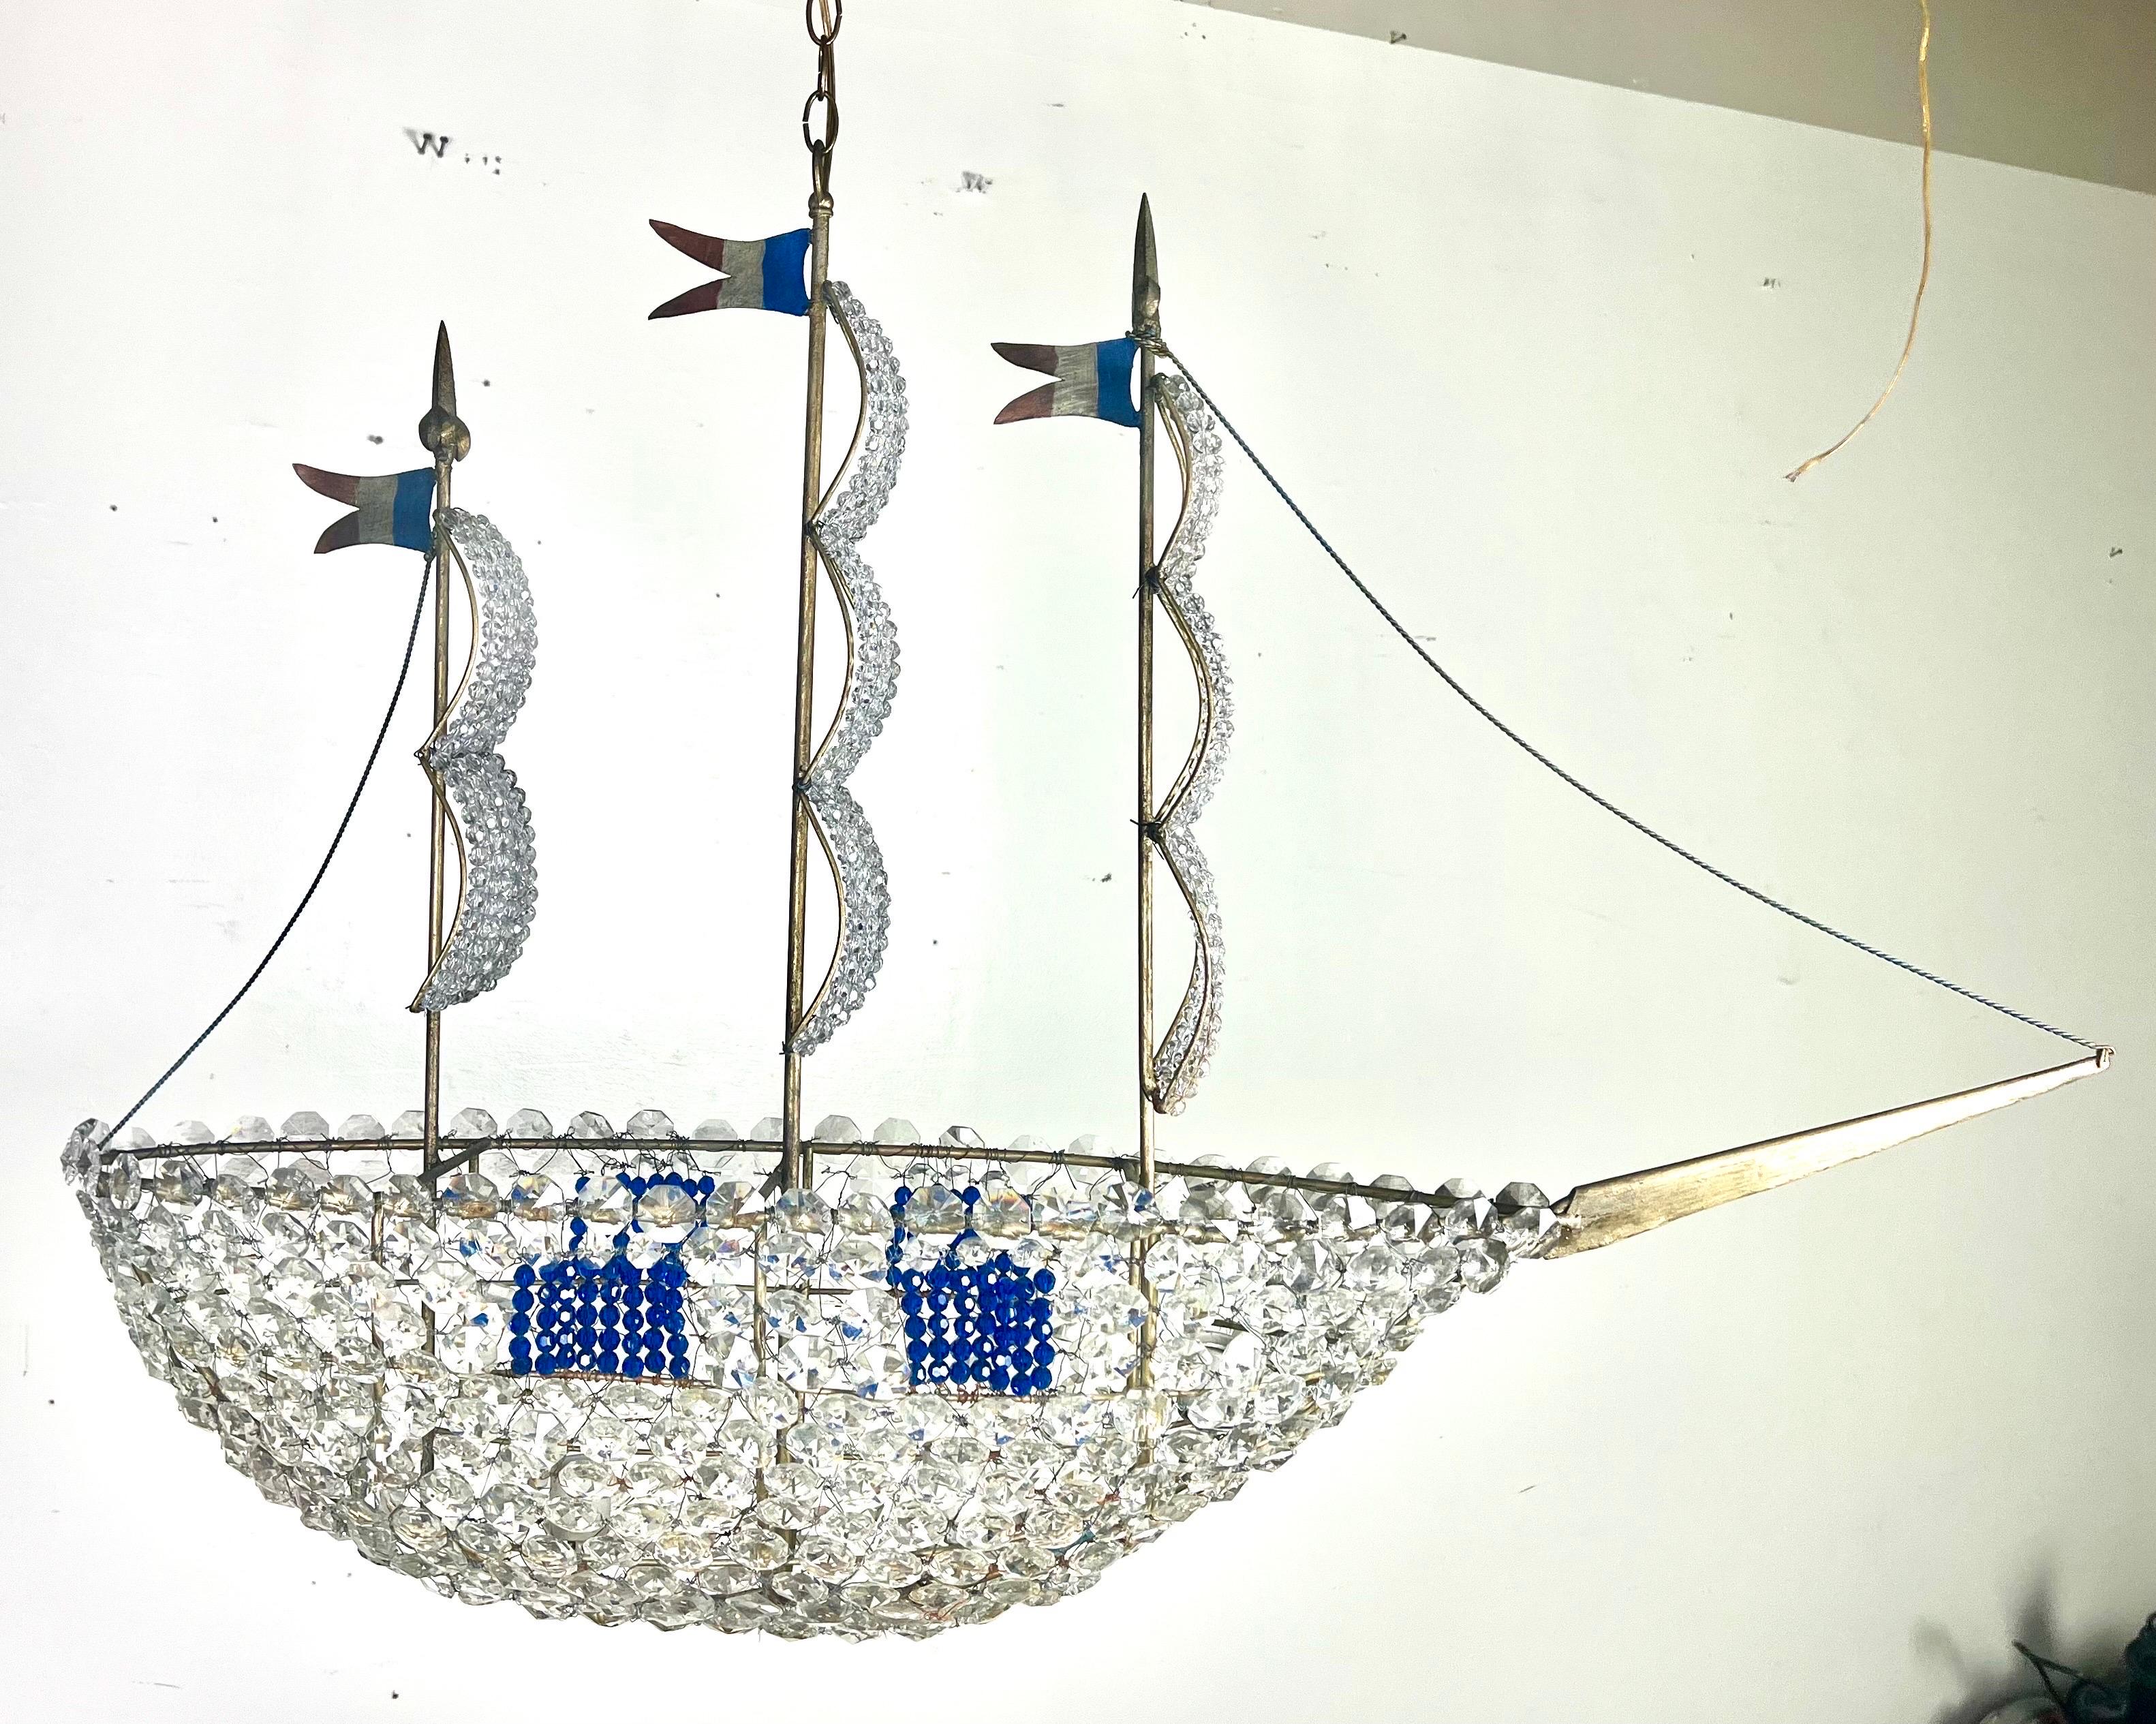 A custom, one-of-a-kind hand beaded ship featuring blue bead accents, metal flags, crystals, and larger crystals at the base, with smaller beads on the sails.  This monumental piece is truly unique and would add a fabulous and distinctive touch to